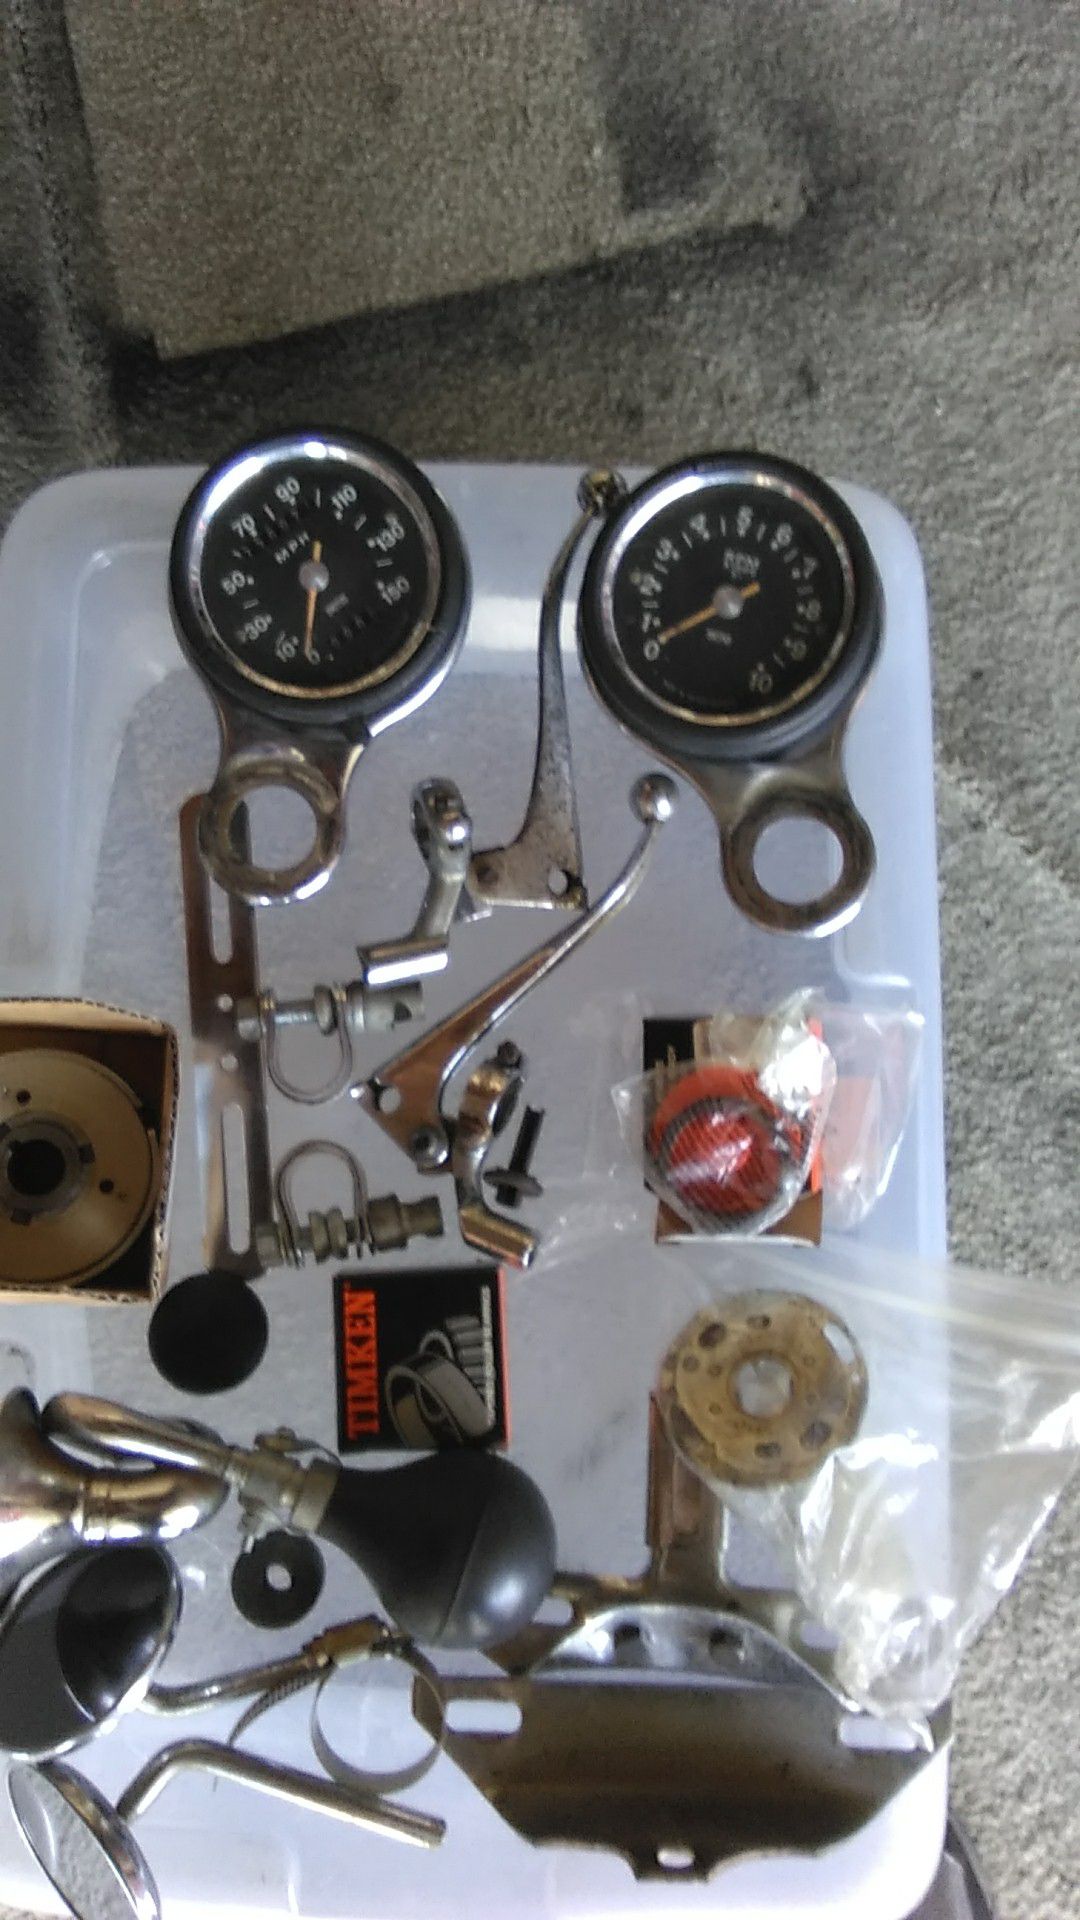 TRIUMPH 1971-1975 DSA 650-750 ALL THESE PARTS COME FROM $65.00 FOR EVERYTHING YOU SEE IN THE PICTURE